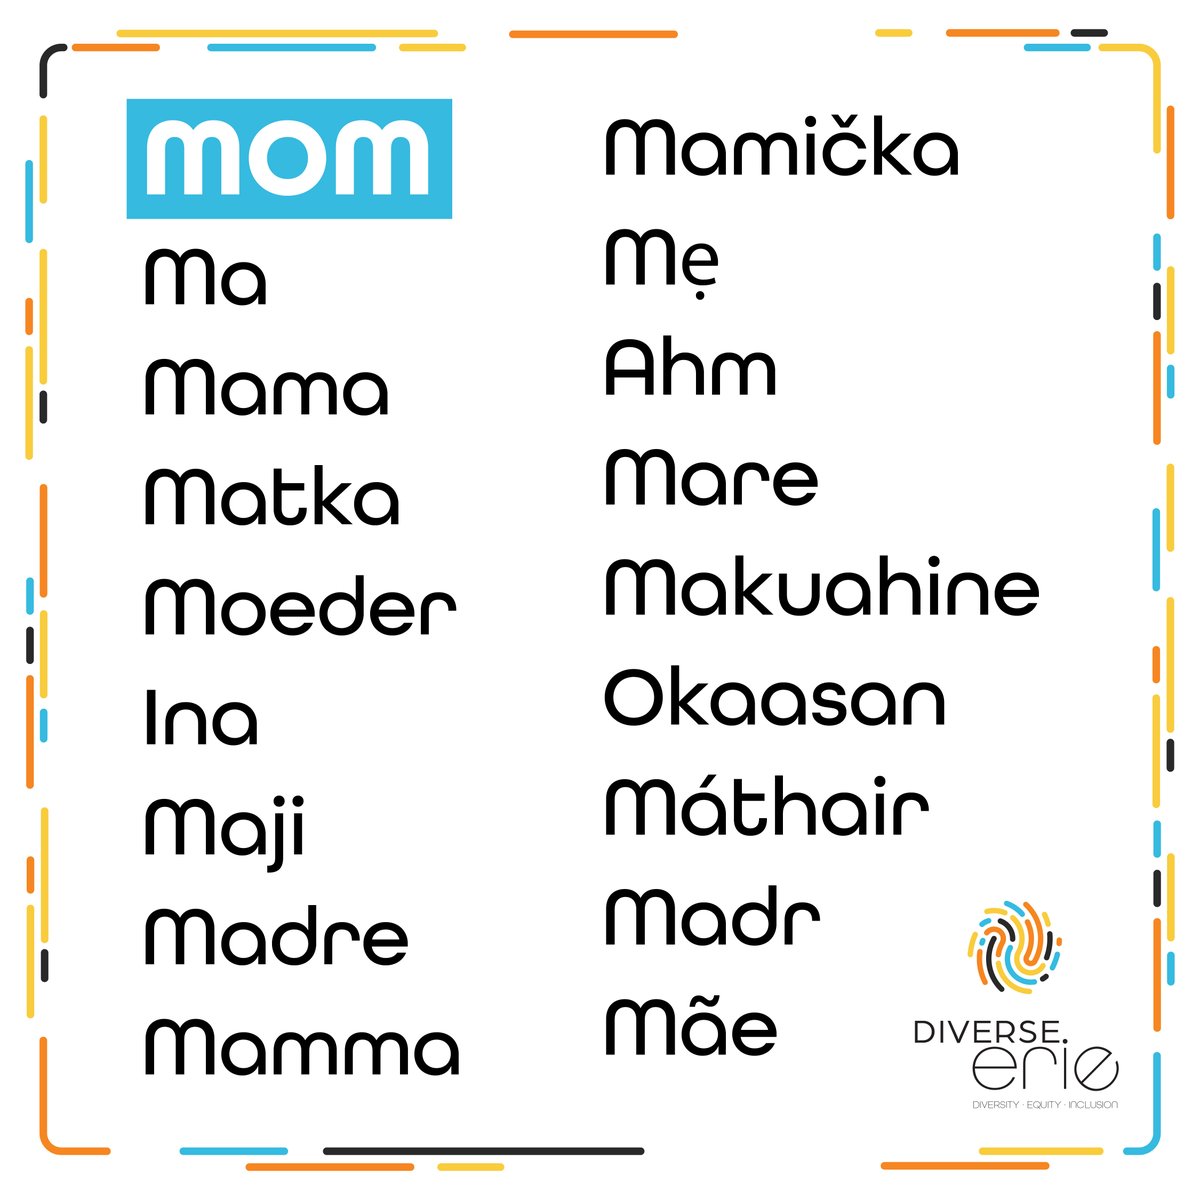 Despite the various ways to say mom, the concept of mothers is undeniably universal. Happy #MothersDay to all the women who have inspired generations! #HappyMothersDay #OurErie #DiverseErie #DEI